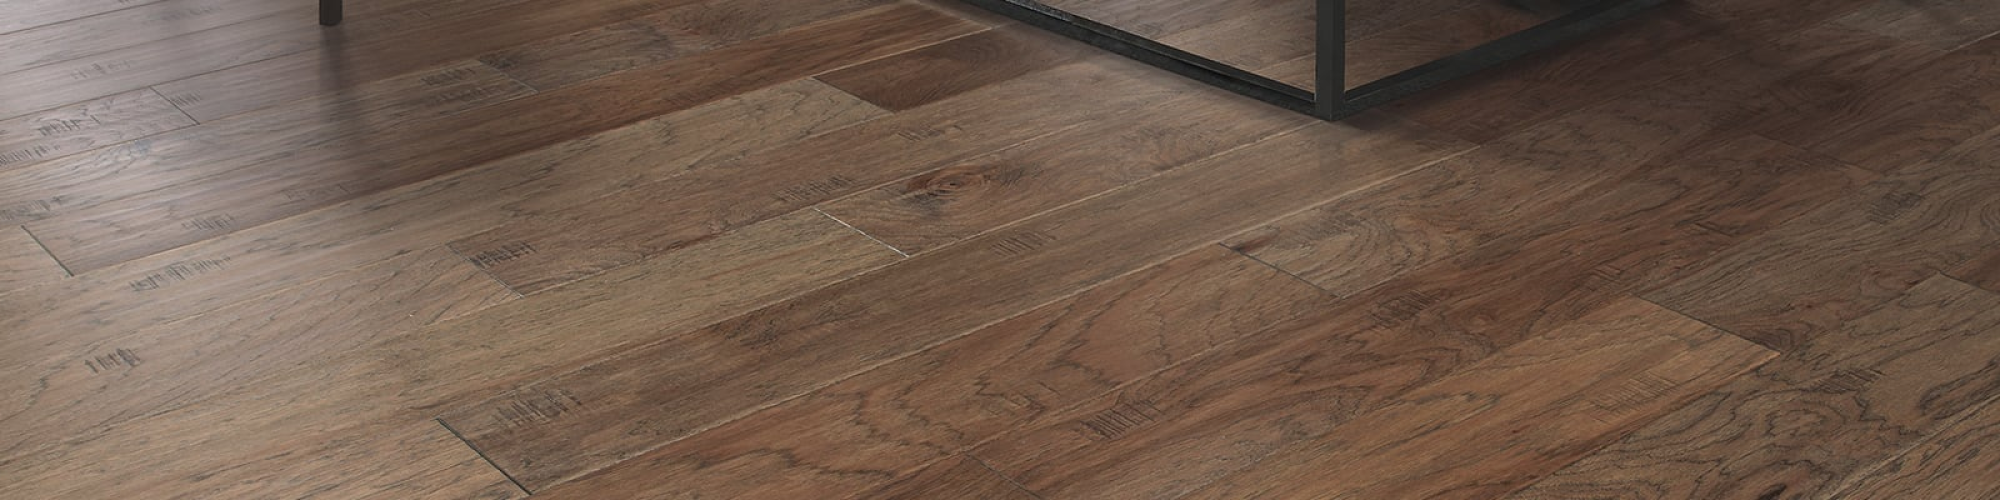 Quality laminate info provided by Heritage Floor Coverings in the North Royalton, OH area